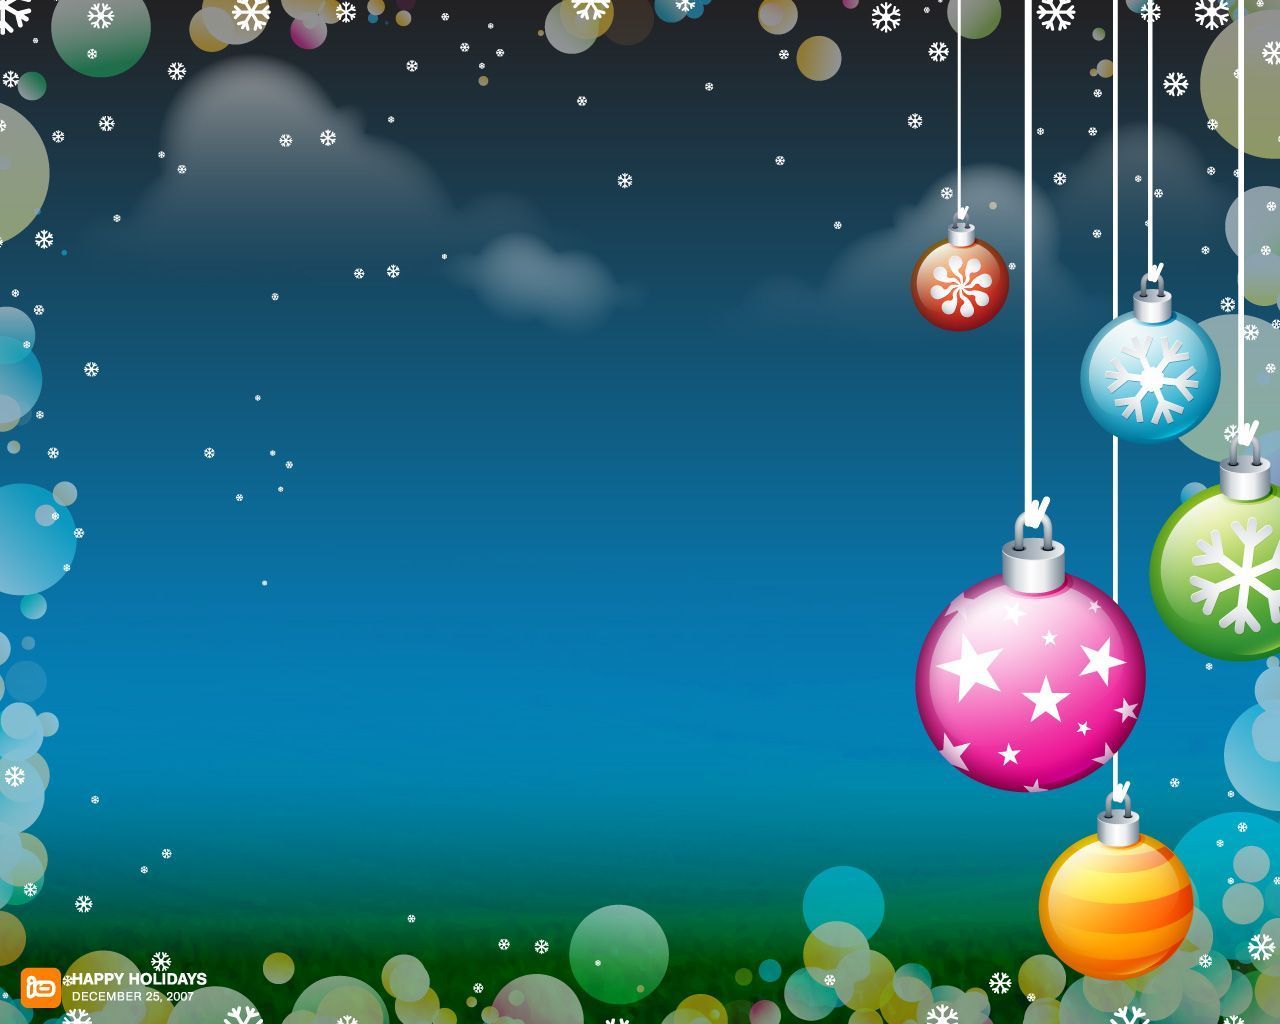 Christmas Party Wallpaper - 125186